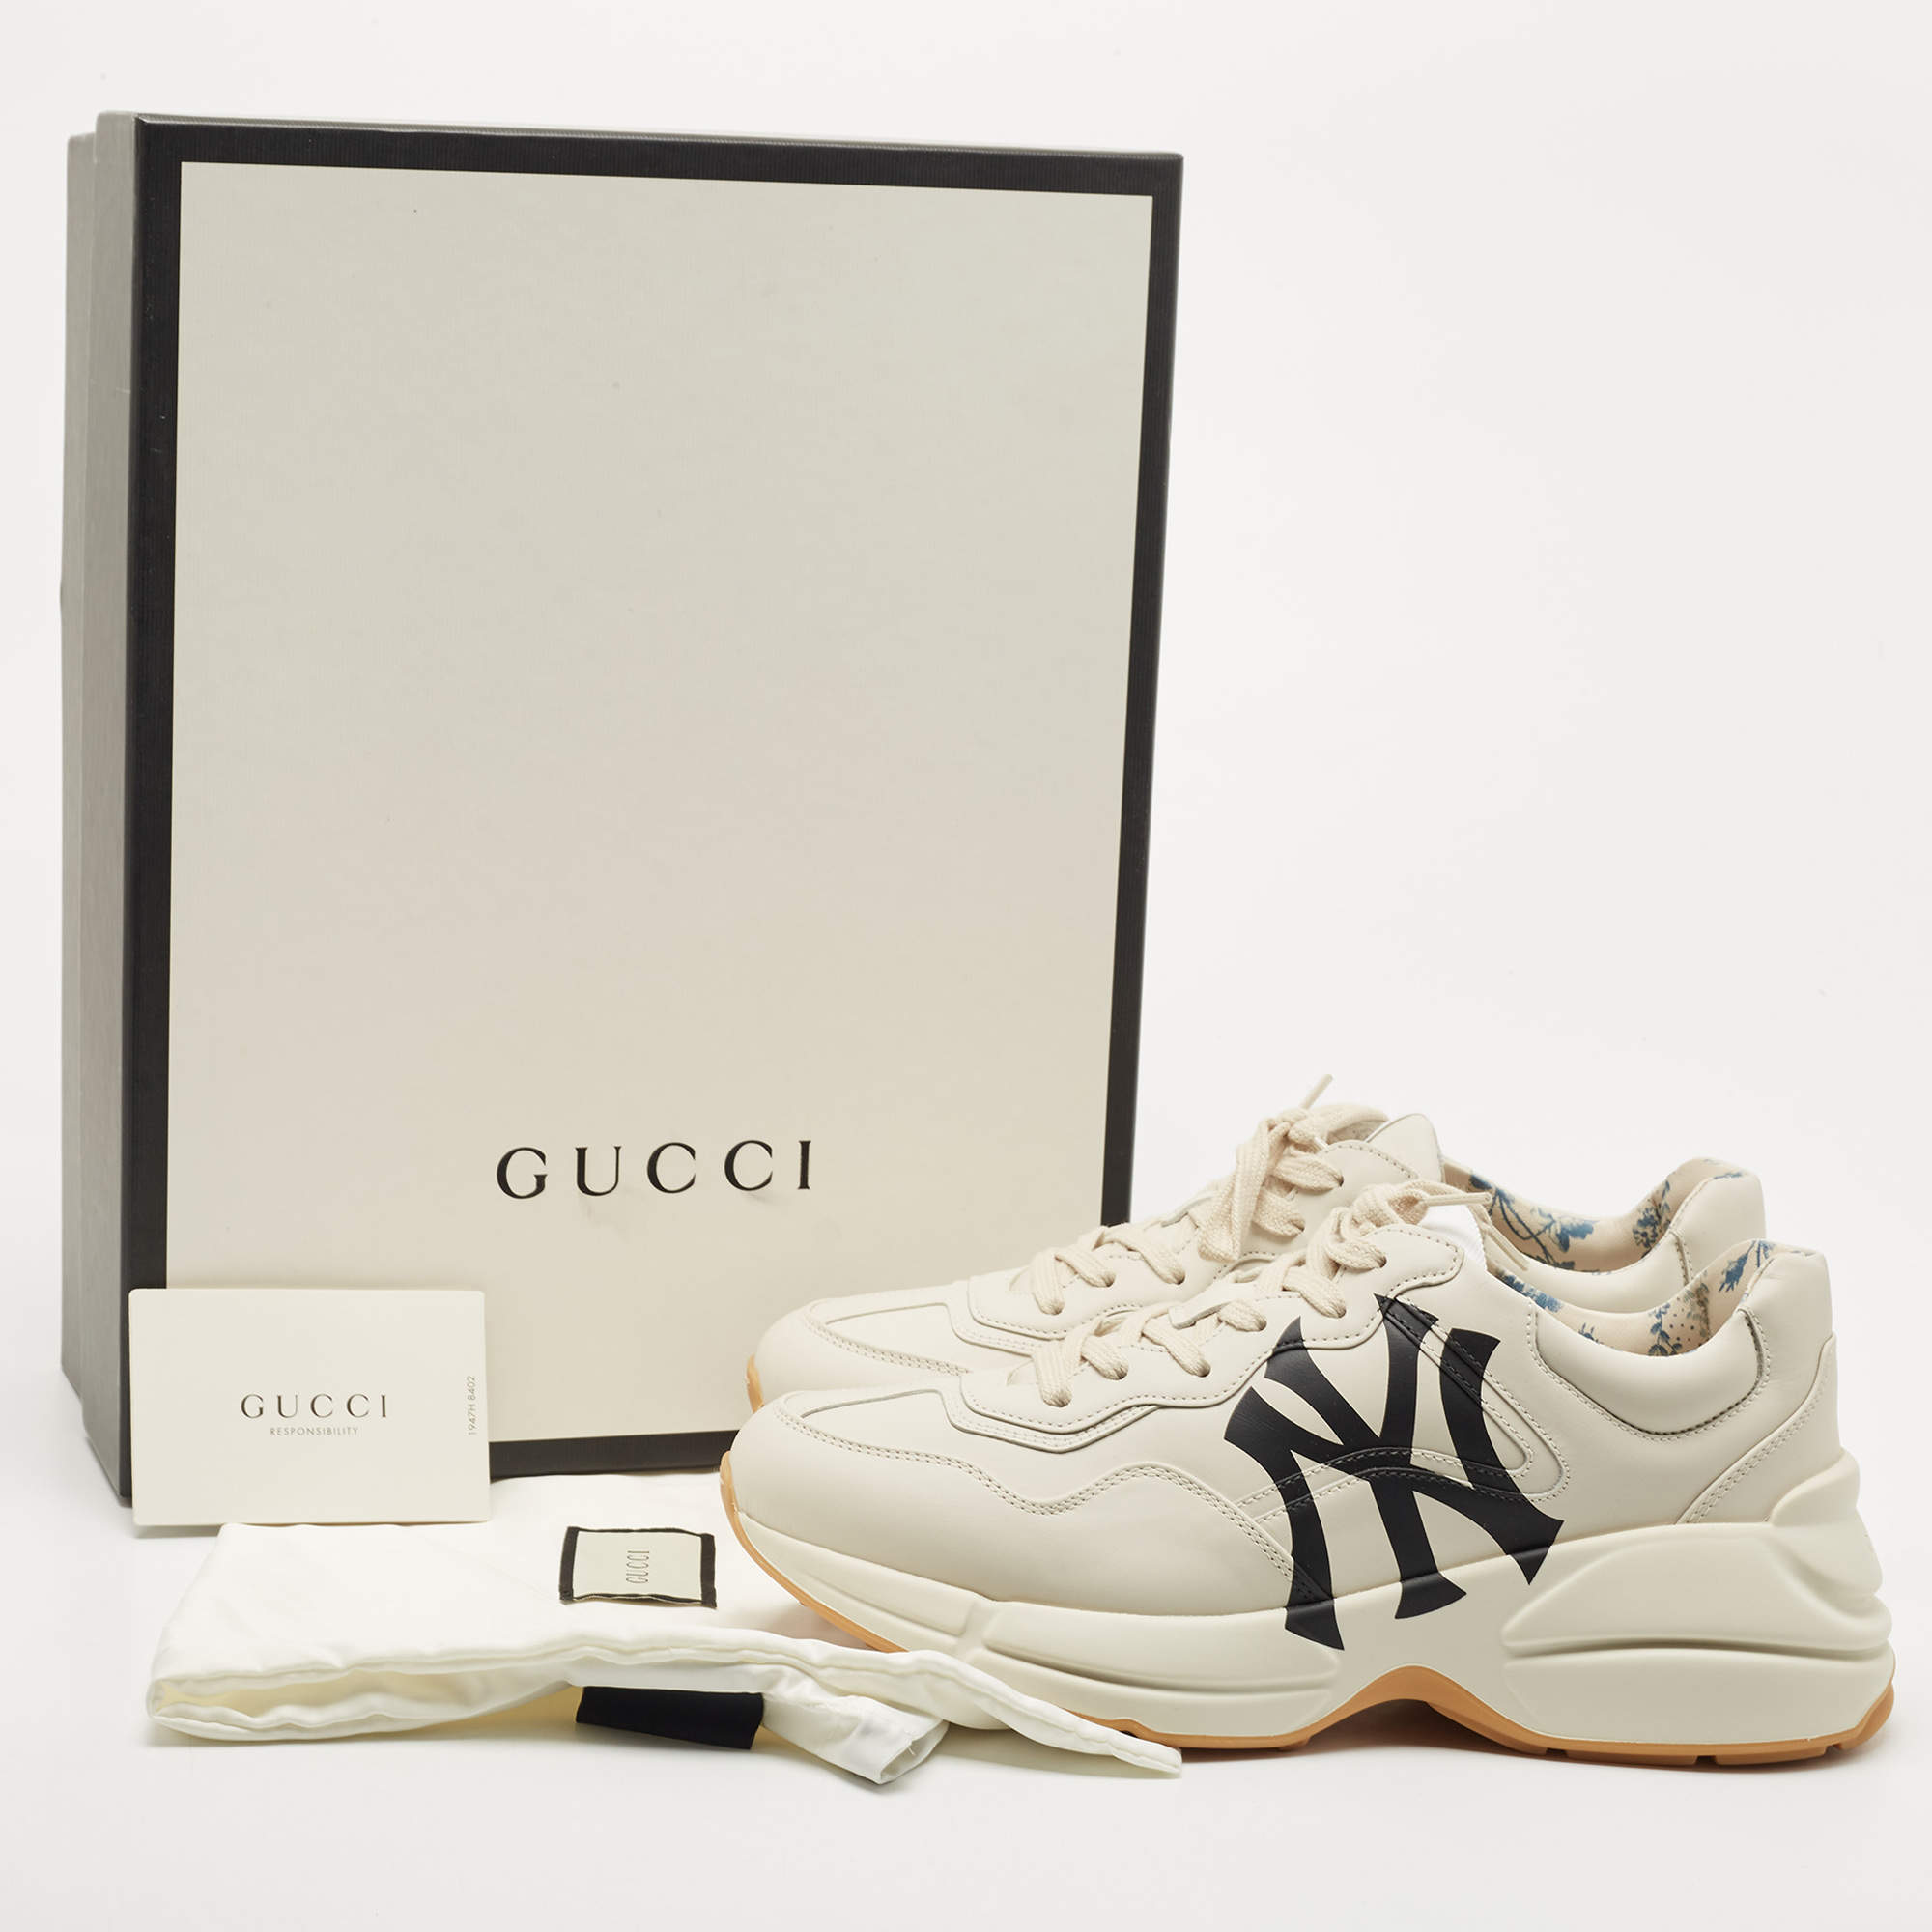 Gucci Rhyton Leather Sneaker 'NY Yankees' 548638-DRW00-4520